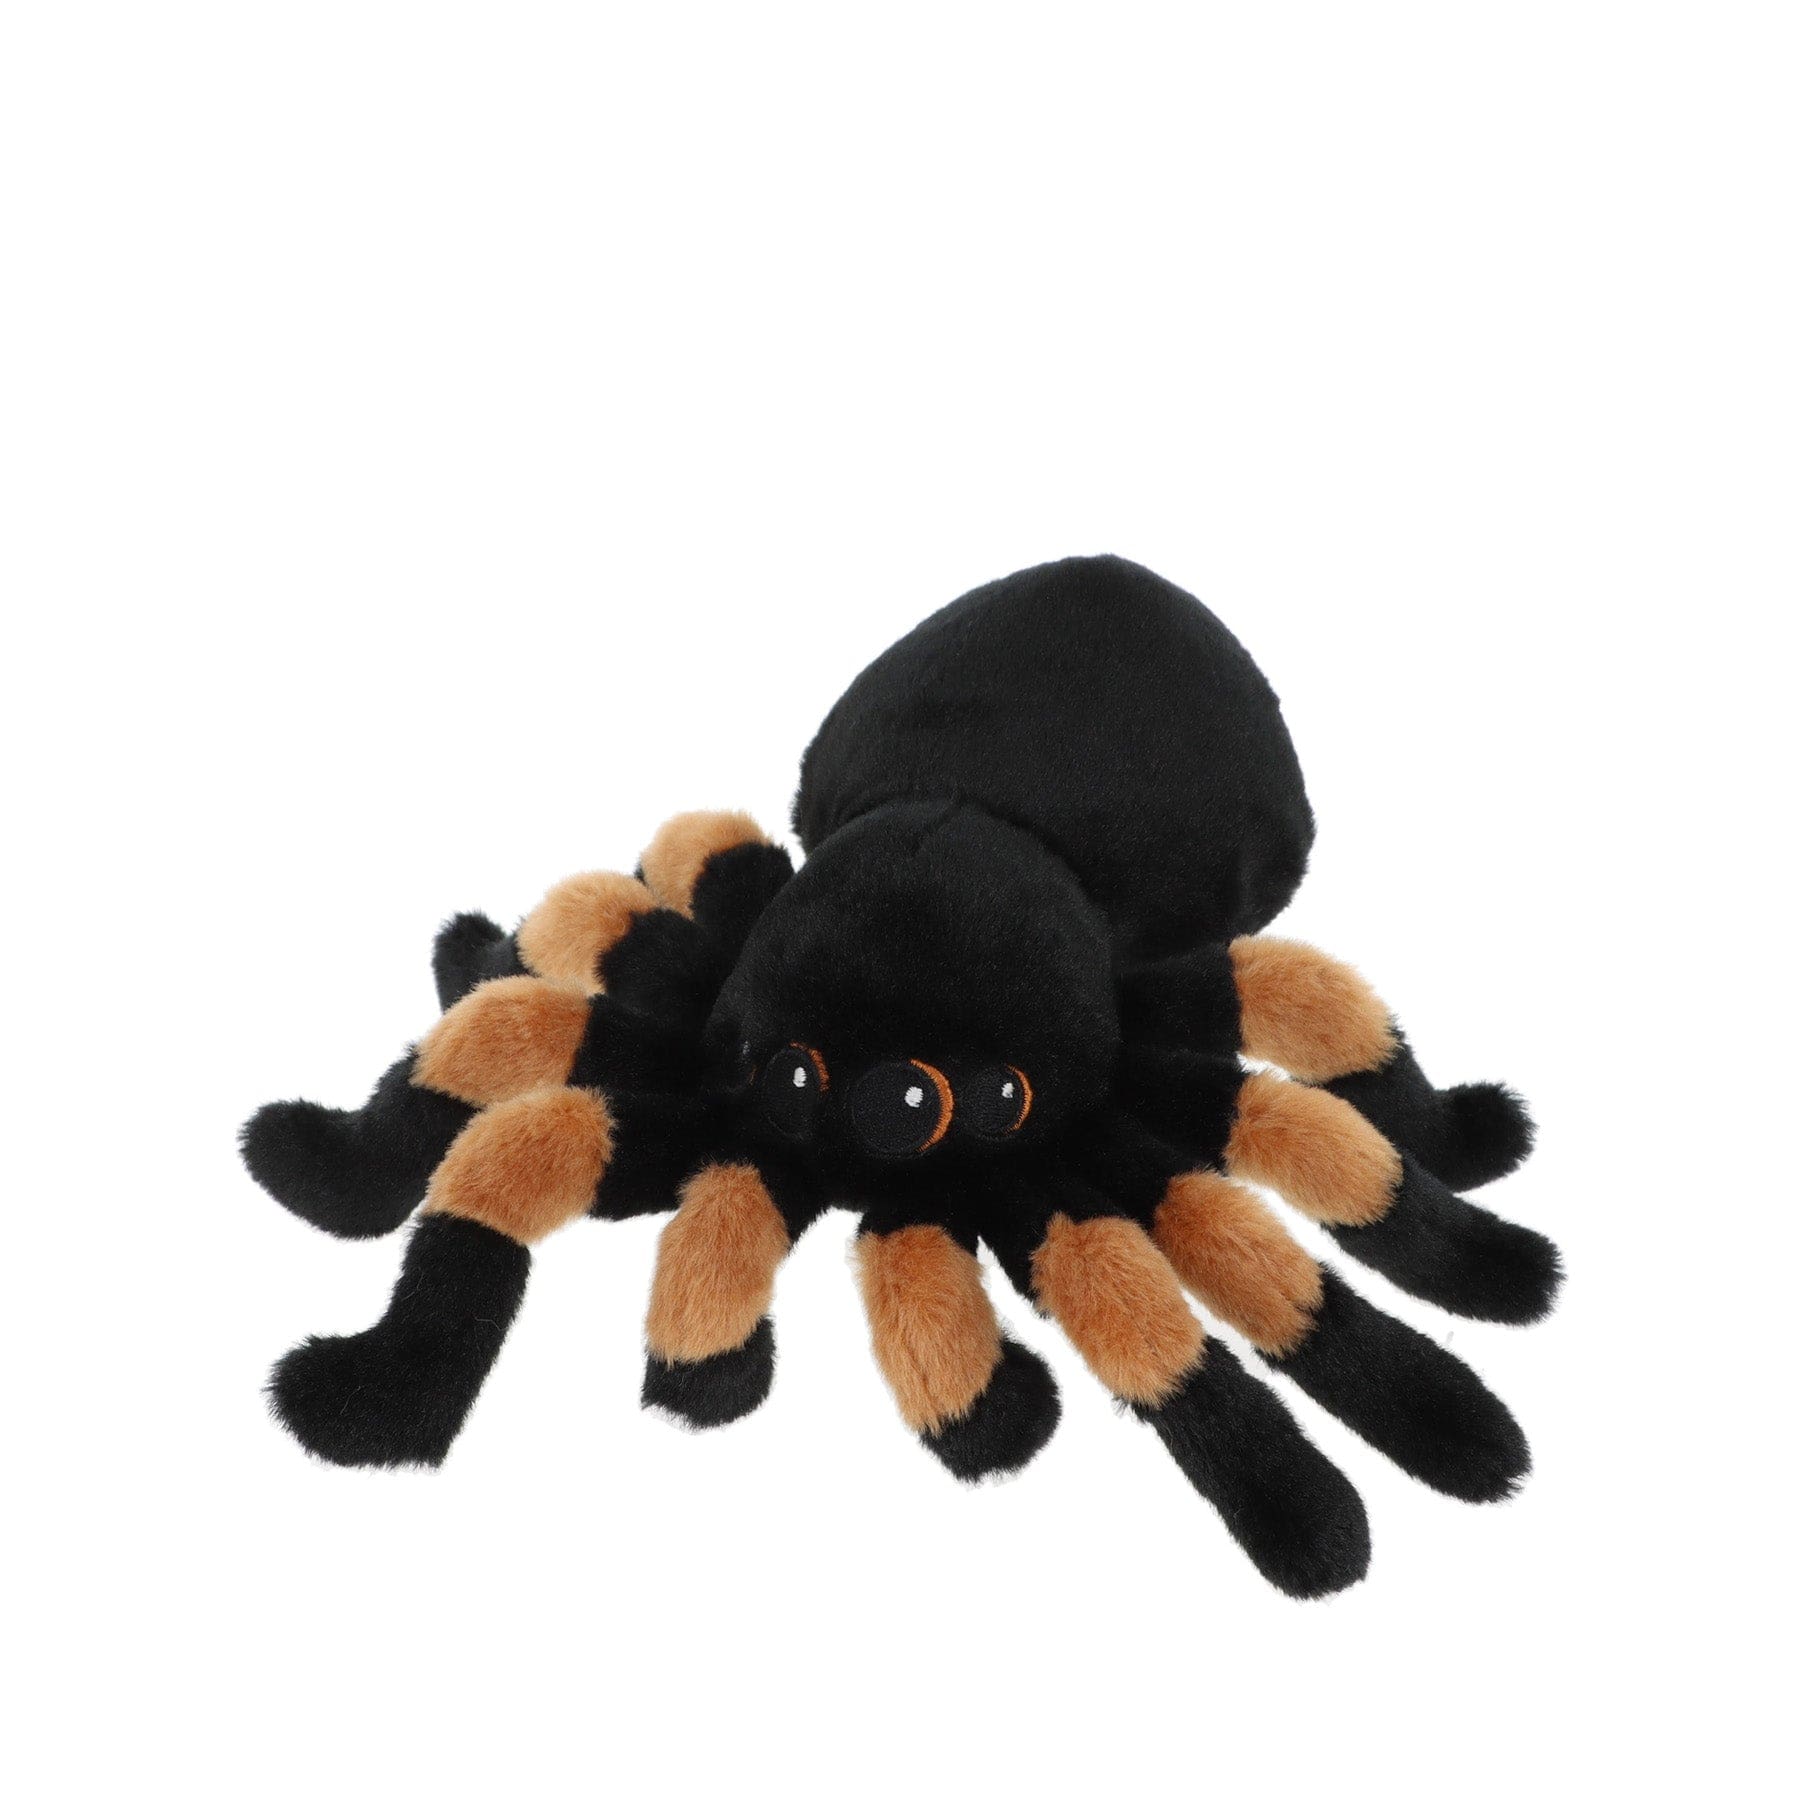 Plush black spider toy with orange accents on a white background.